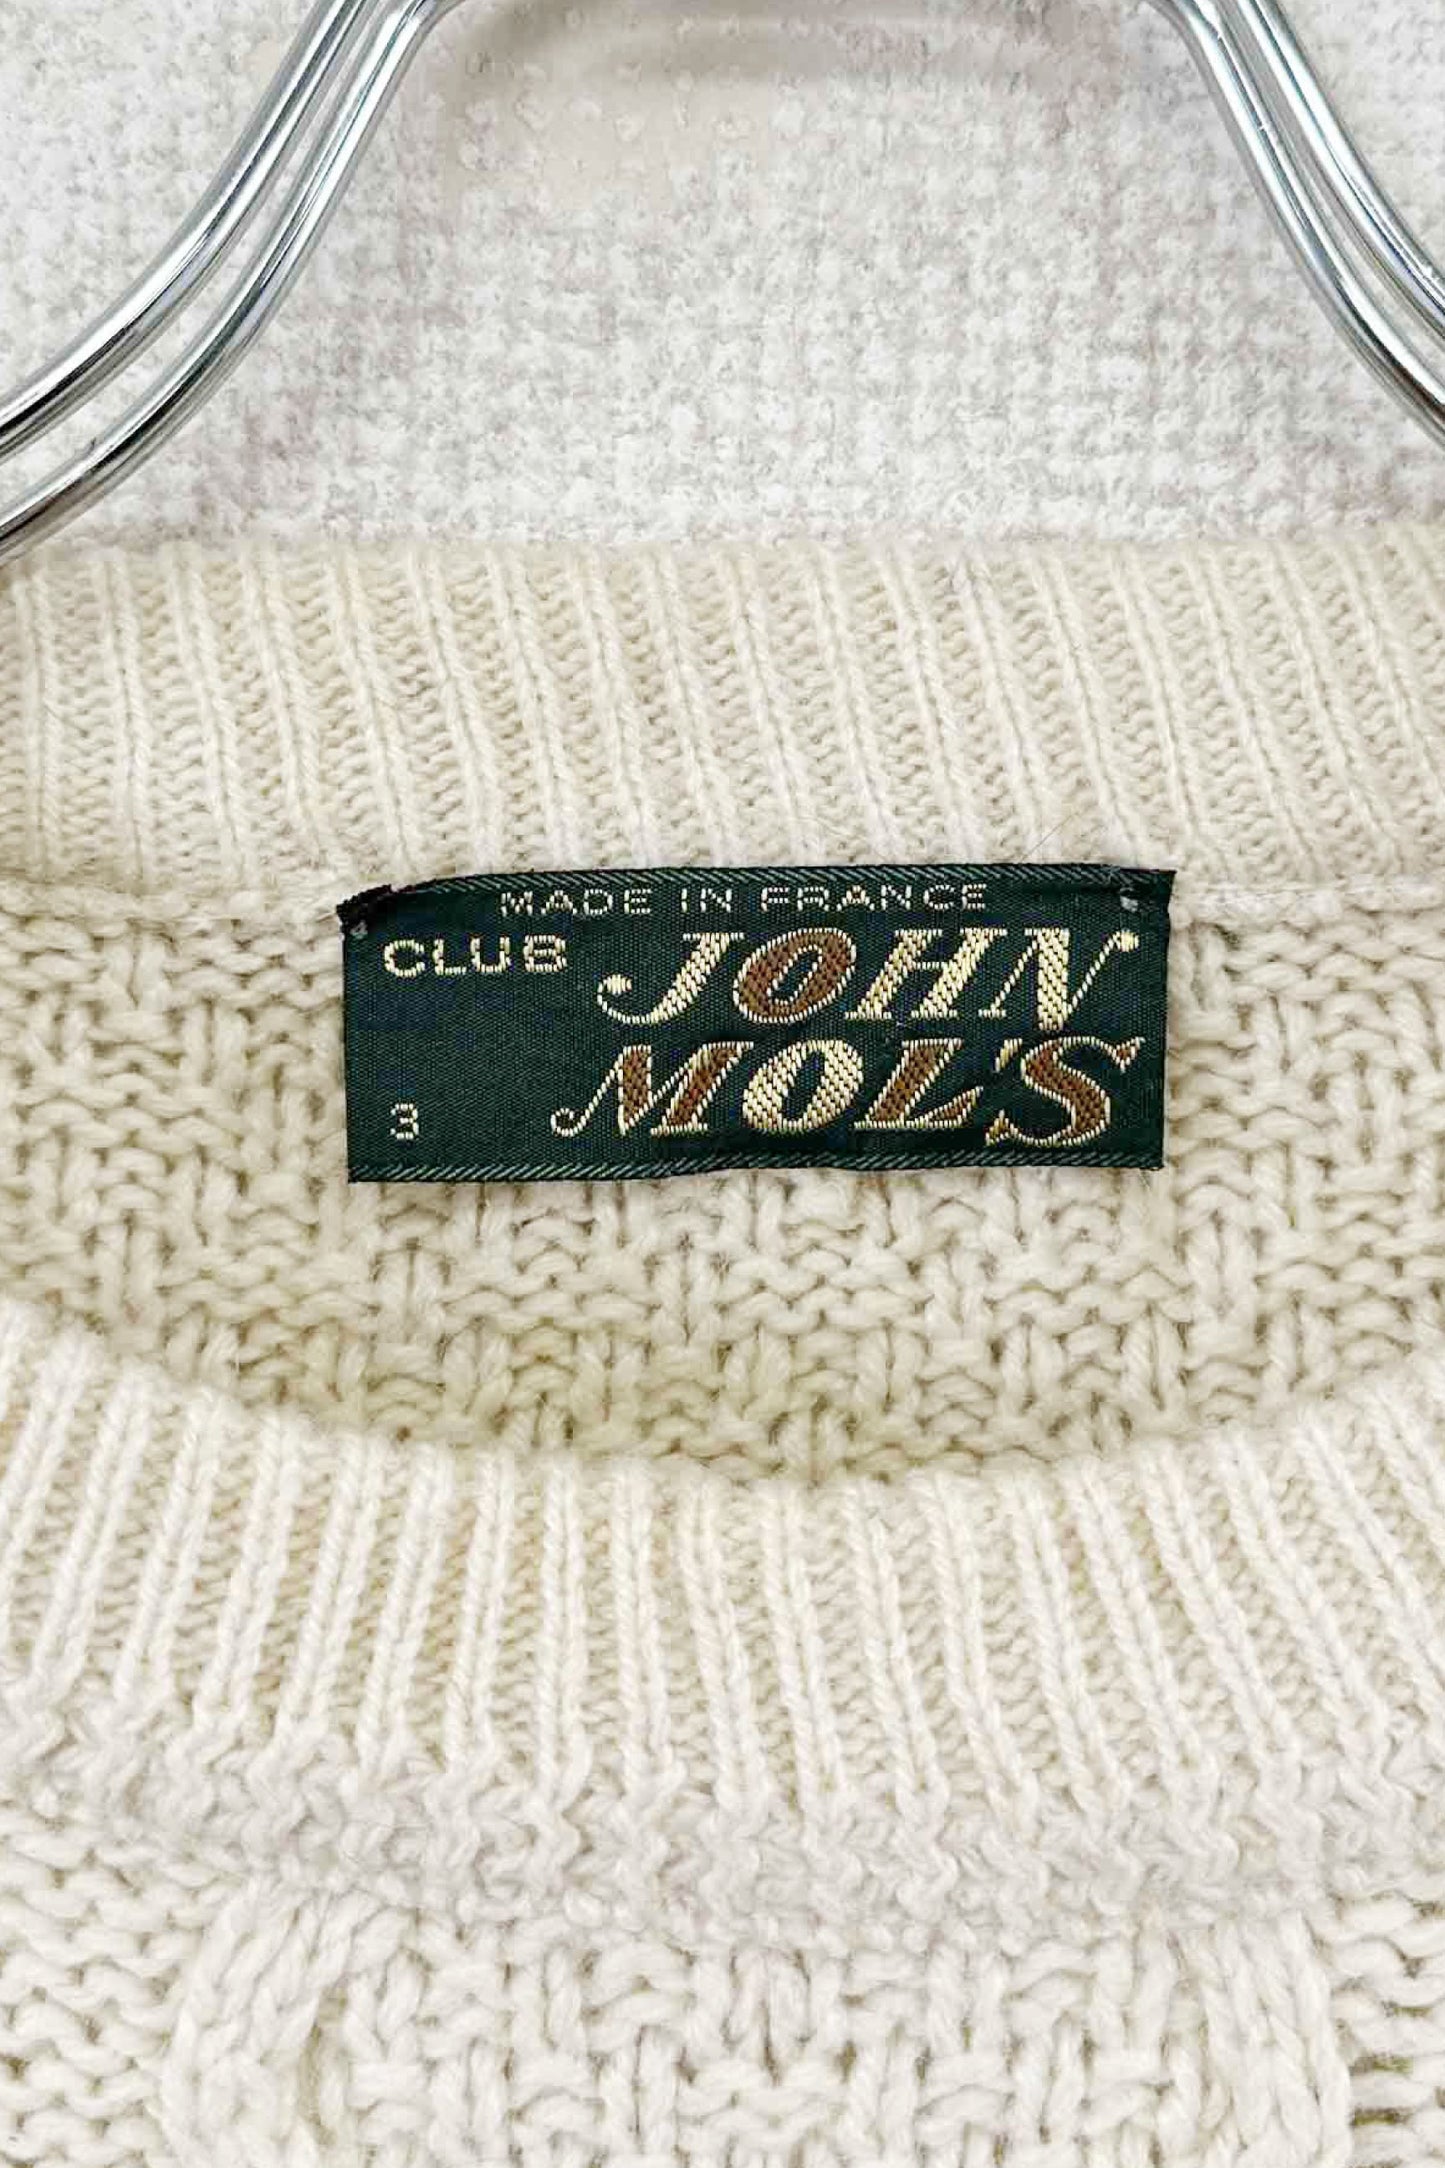 80's Made in FRANCE JOHN MOL'S sweater